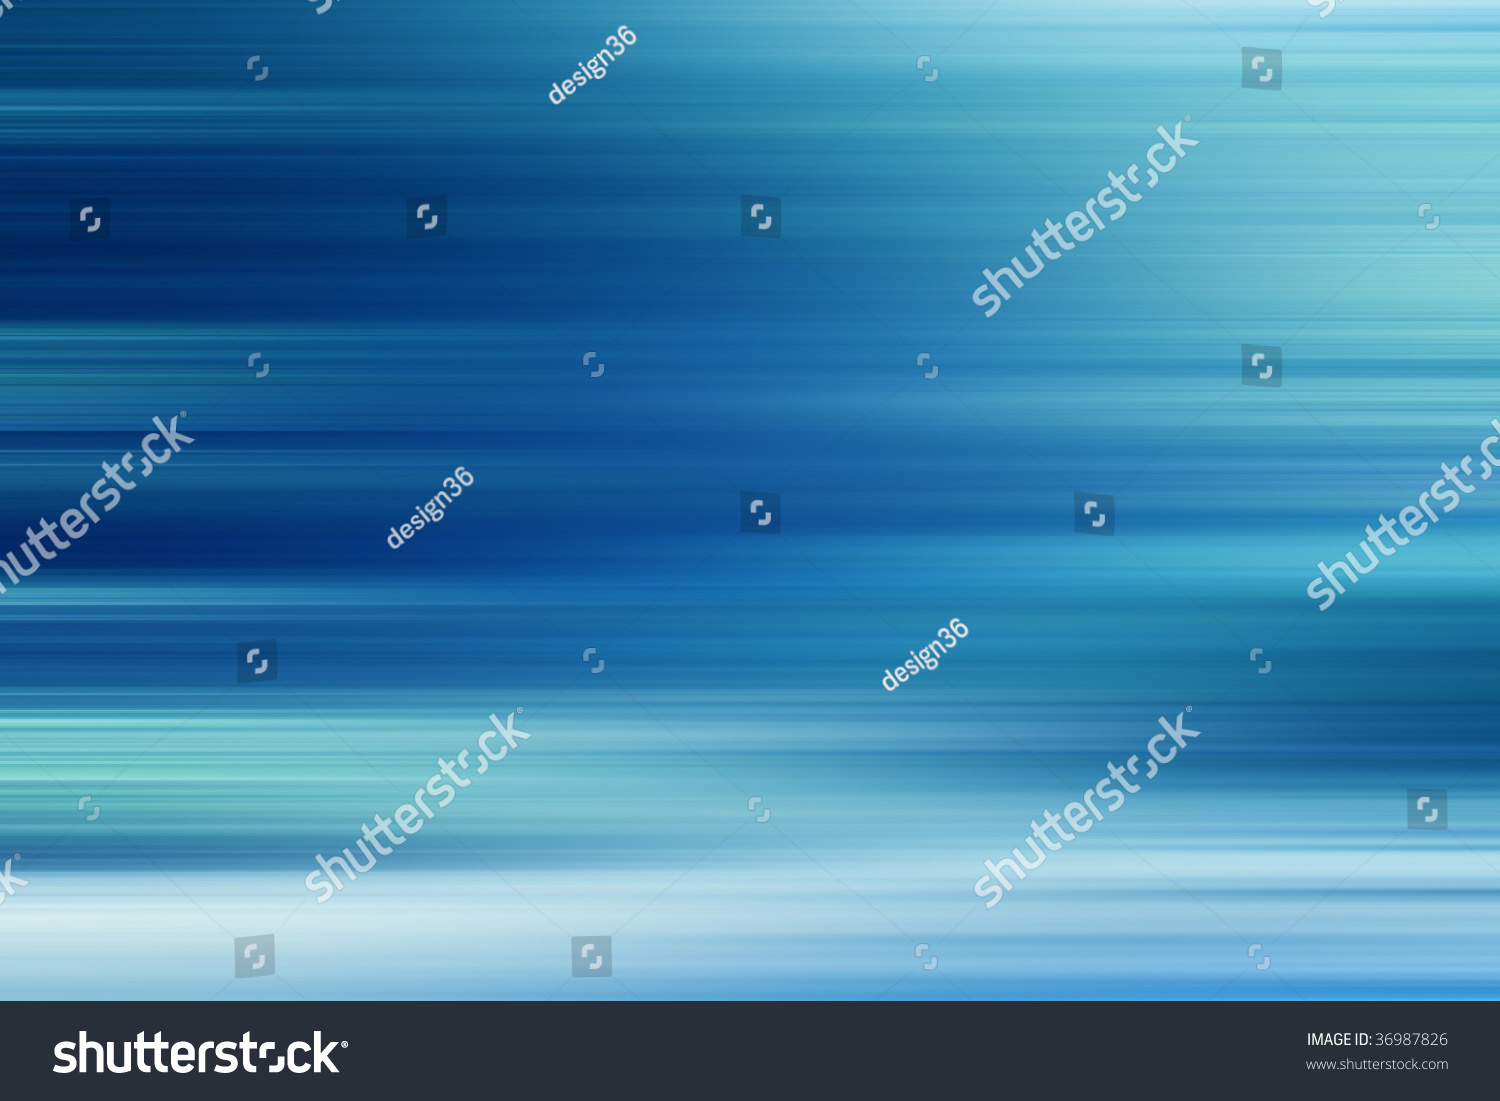 221,743 Blue fast background Stock Photos, Images & Photography ...